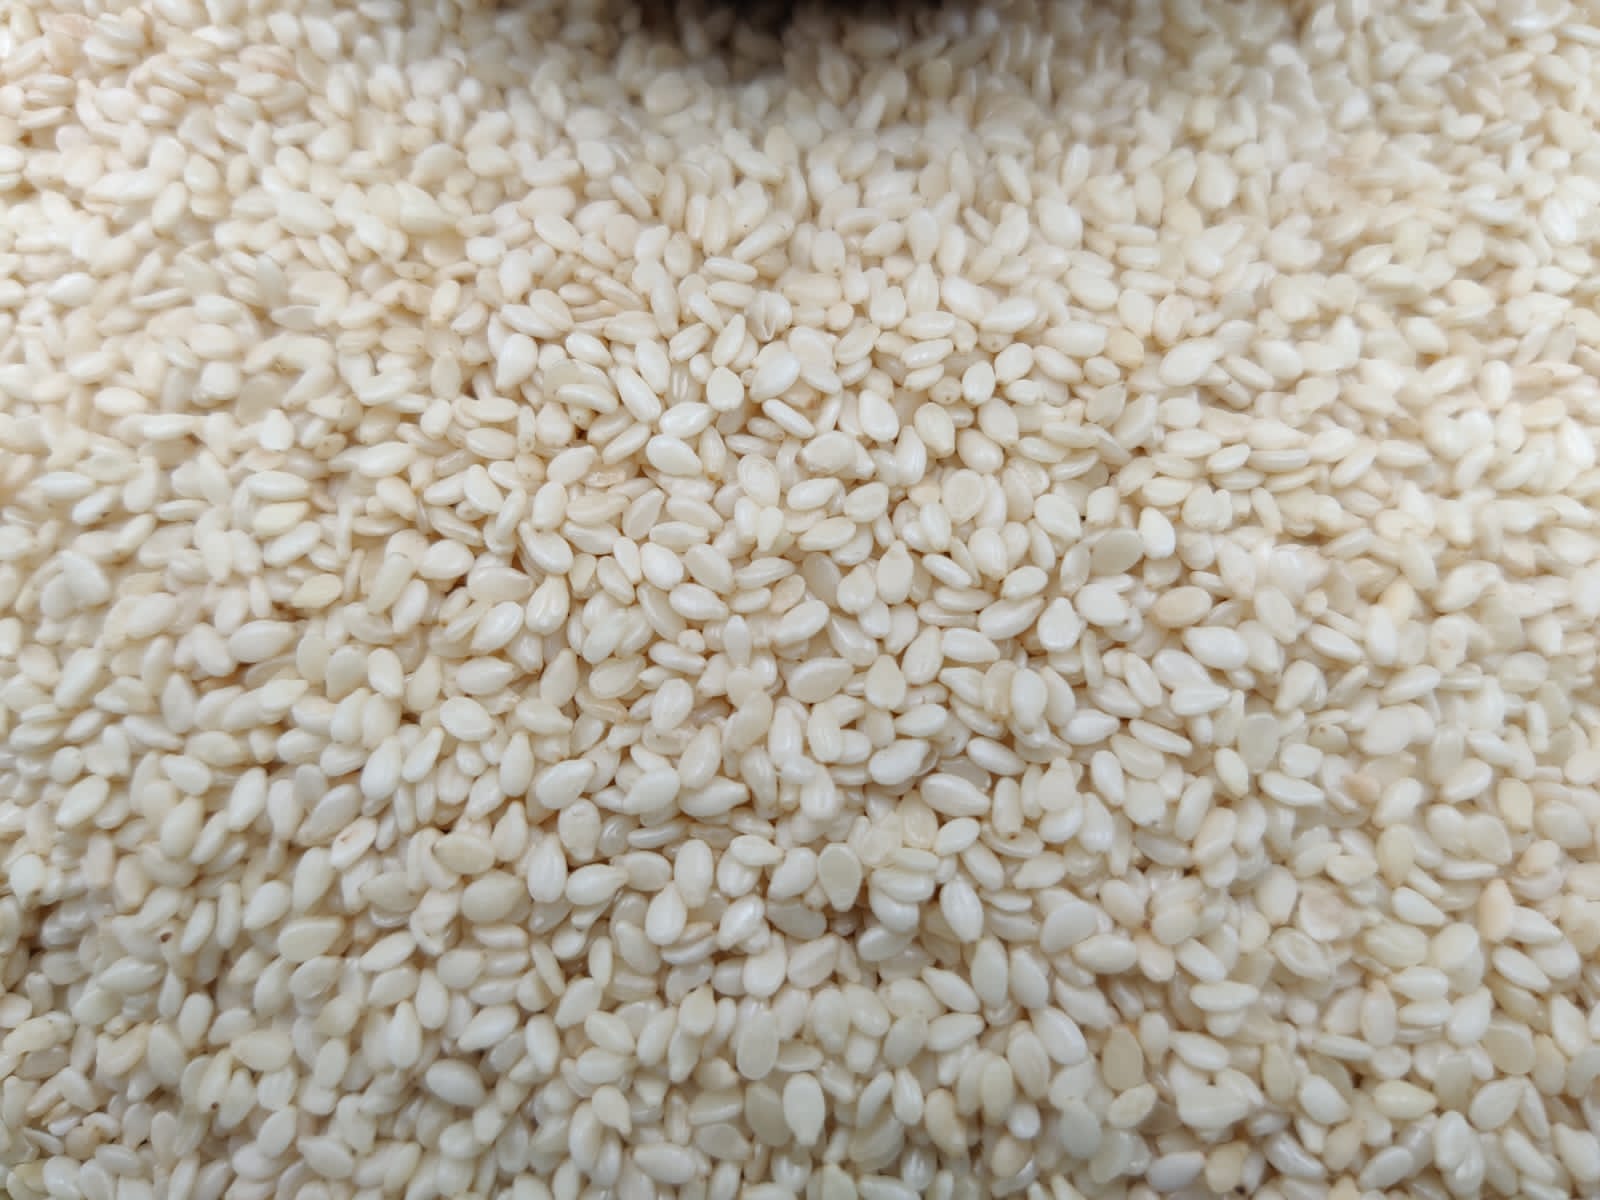  We have best quality hurled  white sesame seeds to sell 00226 54331793 